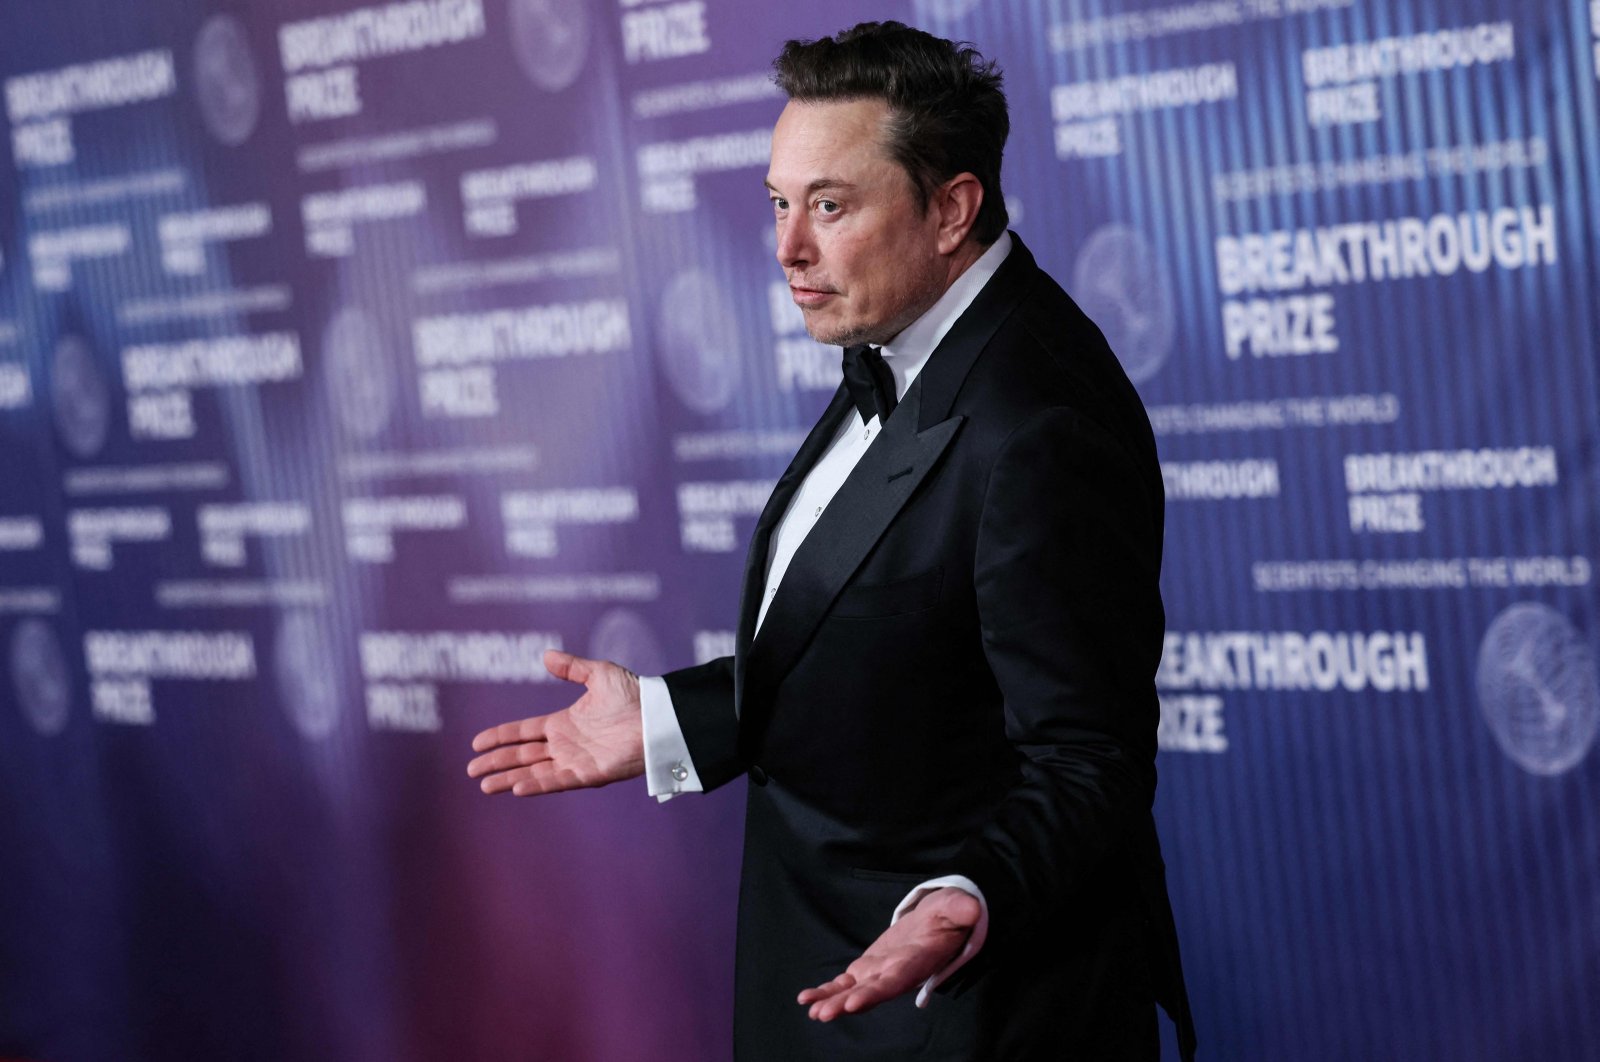 South African businessperson Elon Musk arrives at the Tenth Breakthrough Prize Ceremony at the Academy Museum of Motion Pictures, Los Angeles, California, U.S., April 13, 2024. (AFP Photo)